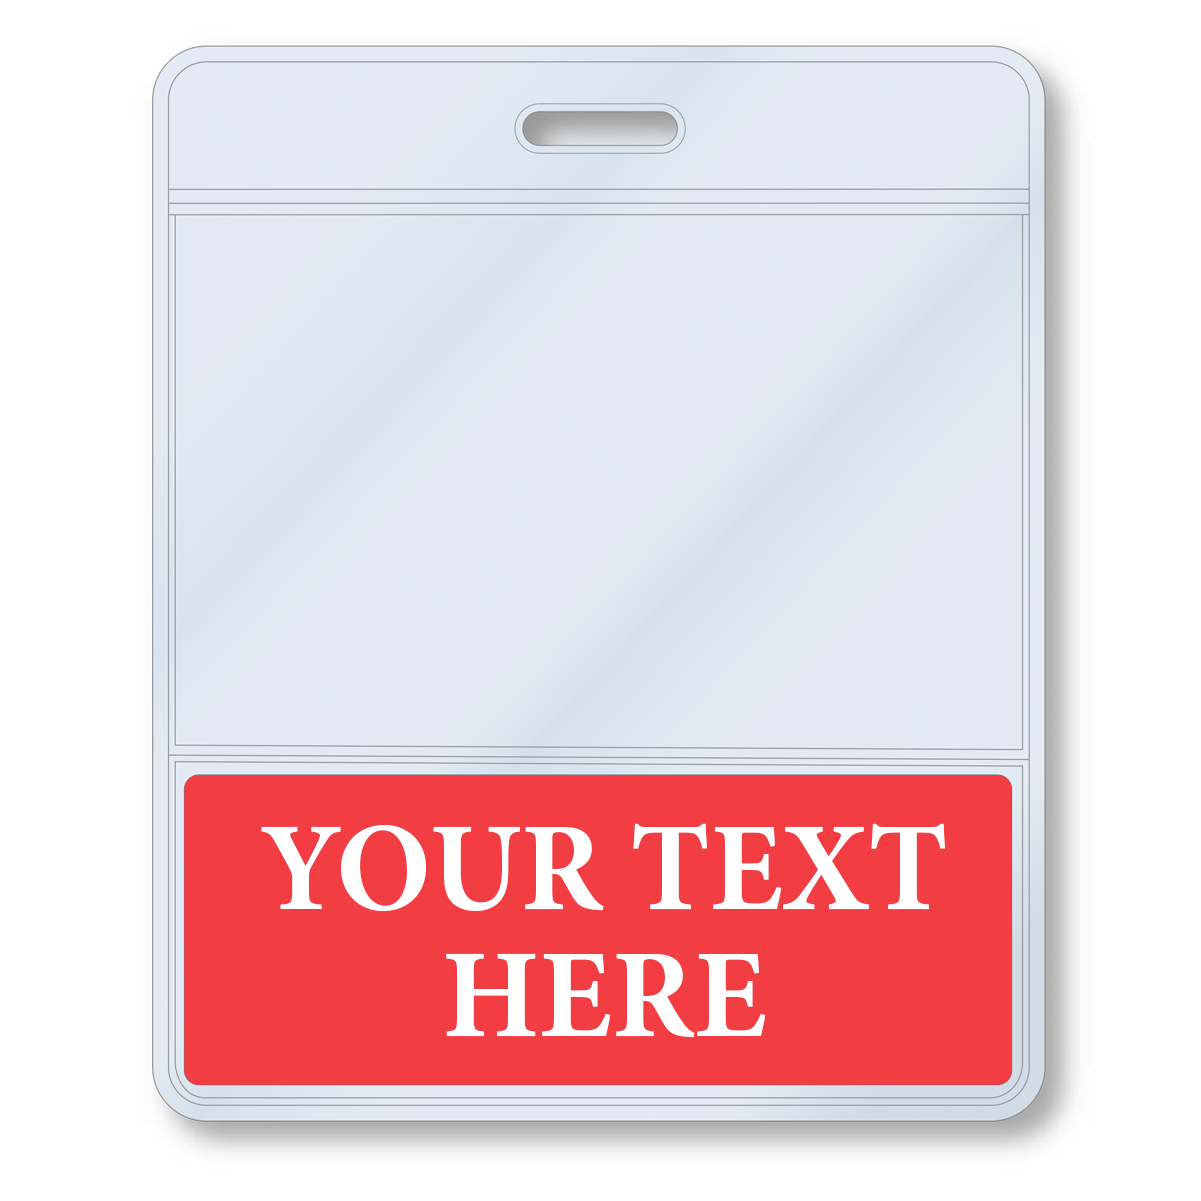 A white Custom Printed BadgeBottoms® Horizontal (Badge Holder & Badge Buddy IN ONE) with a red bottom section displaying the customizable title "YOUR TEXT HERE" in white letters. The badge holder has a slot at the top for attaching to a lanyard, making it perfect for any event or workplace.